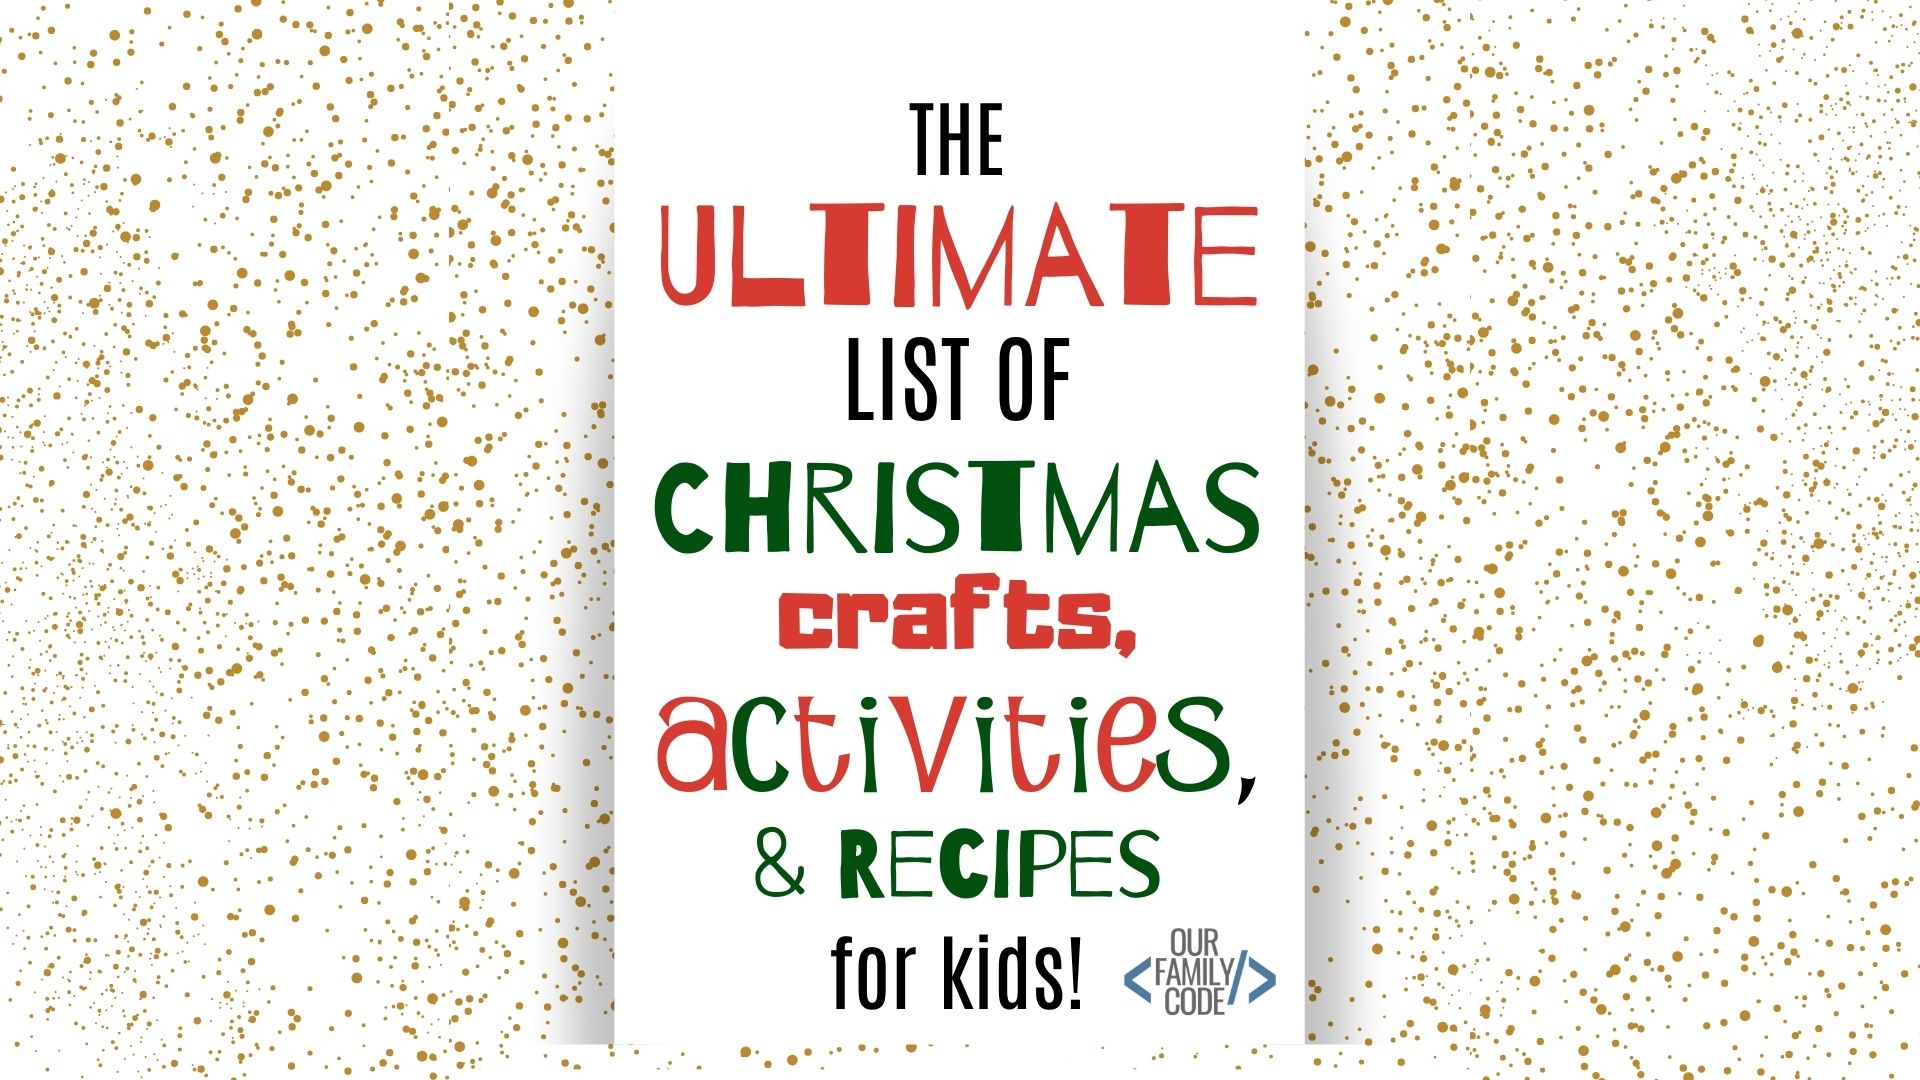 32 Christmas crafts, activities, and recipes for kids! #craftsforkids #Christmasrecipes #Christmas